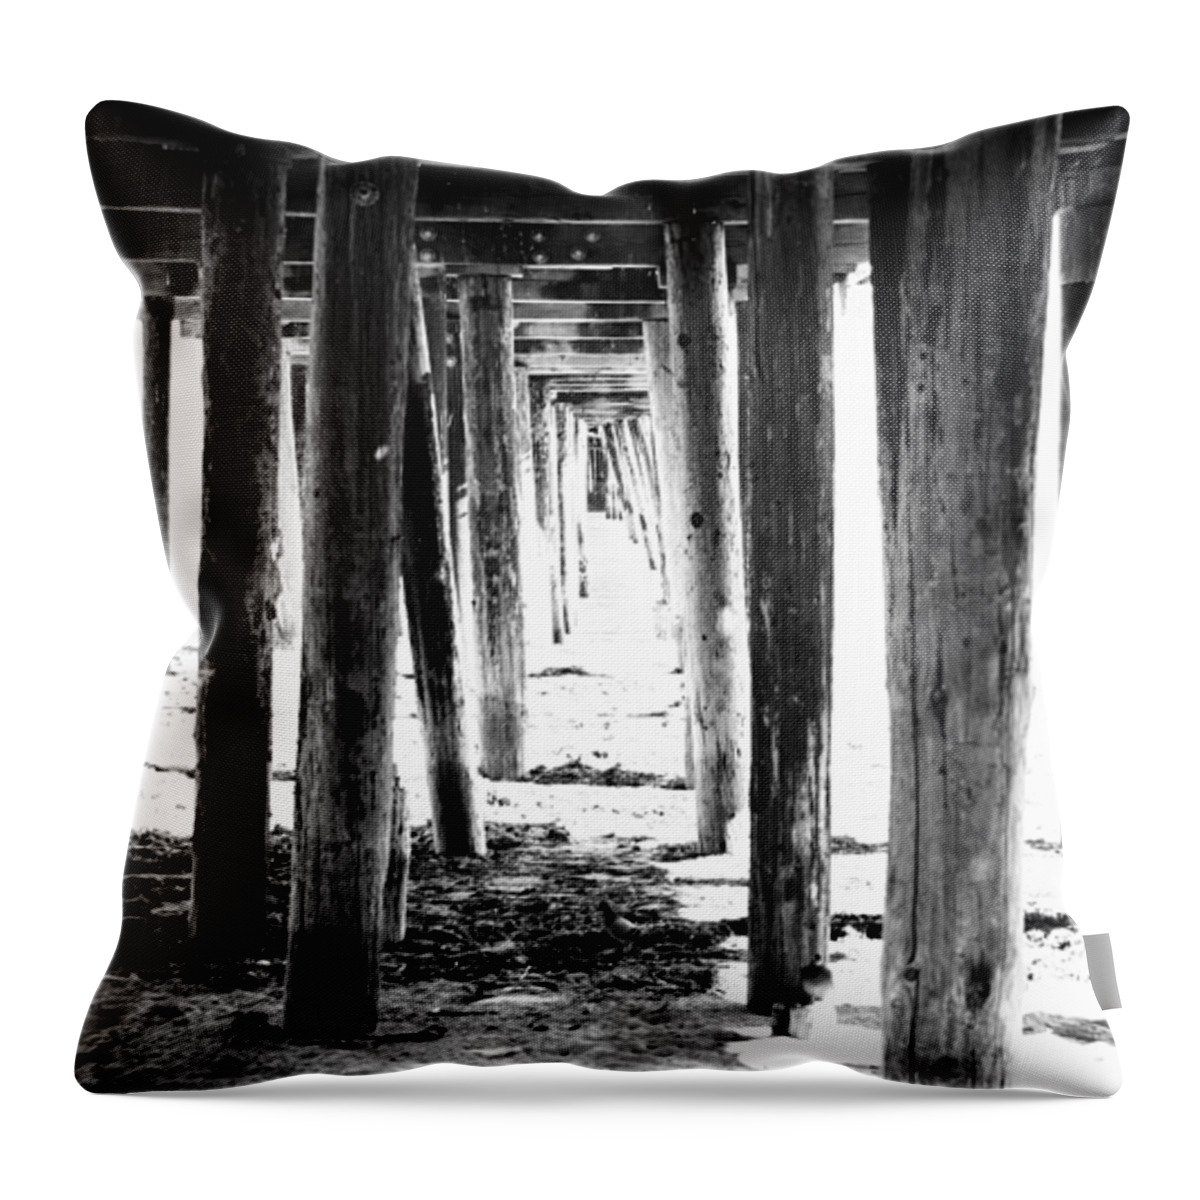 Pier Throw Pillow featuring the mixed media Under The Pier by Linda Woods